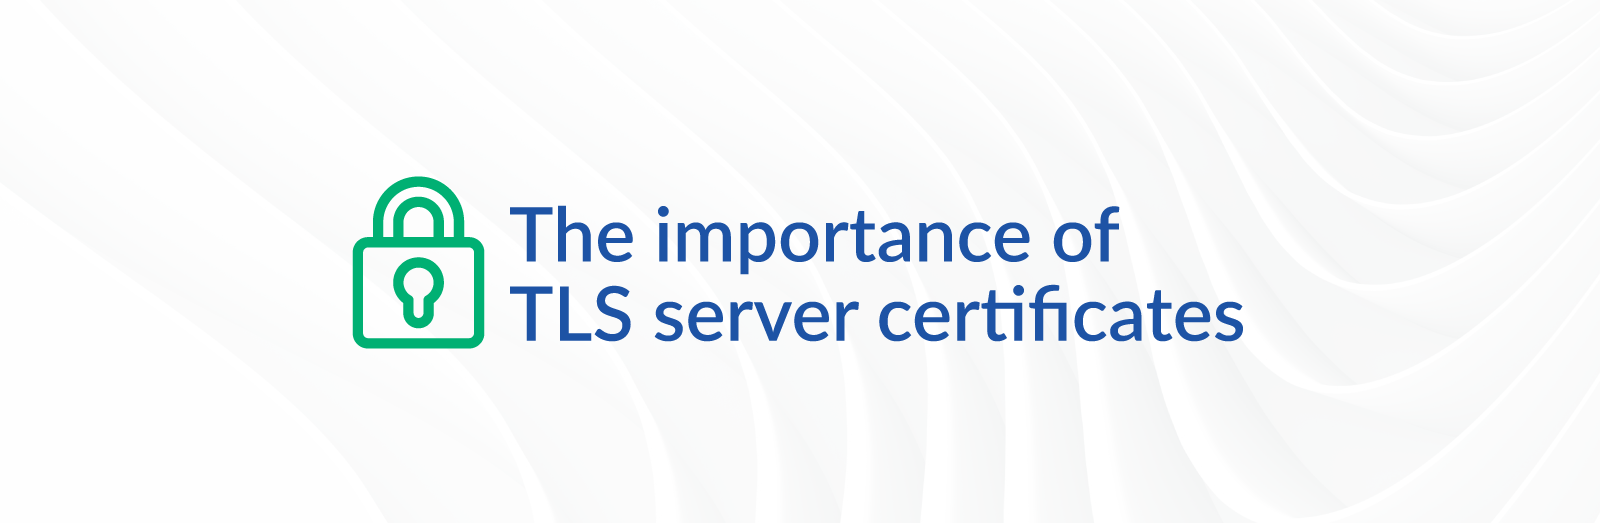 The importance of TLS server certificates